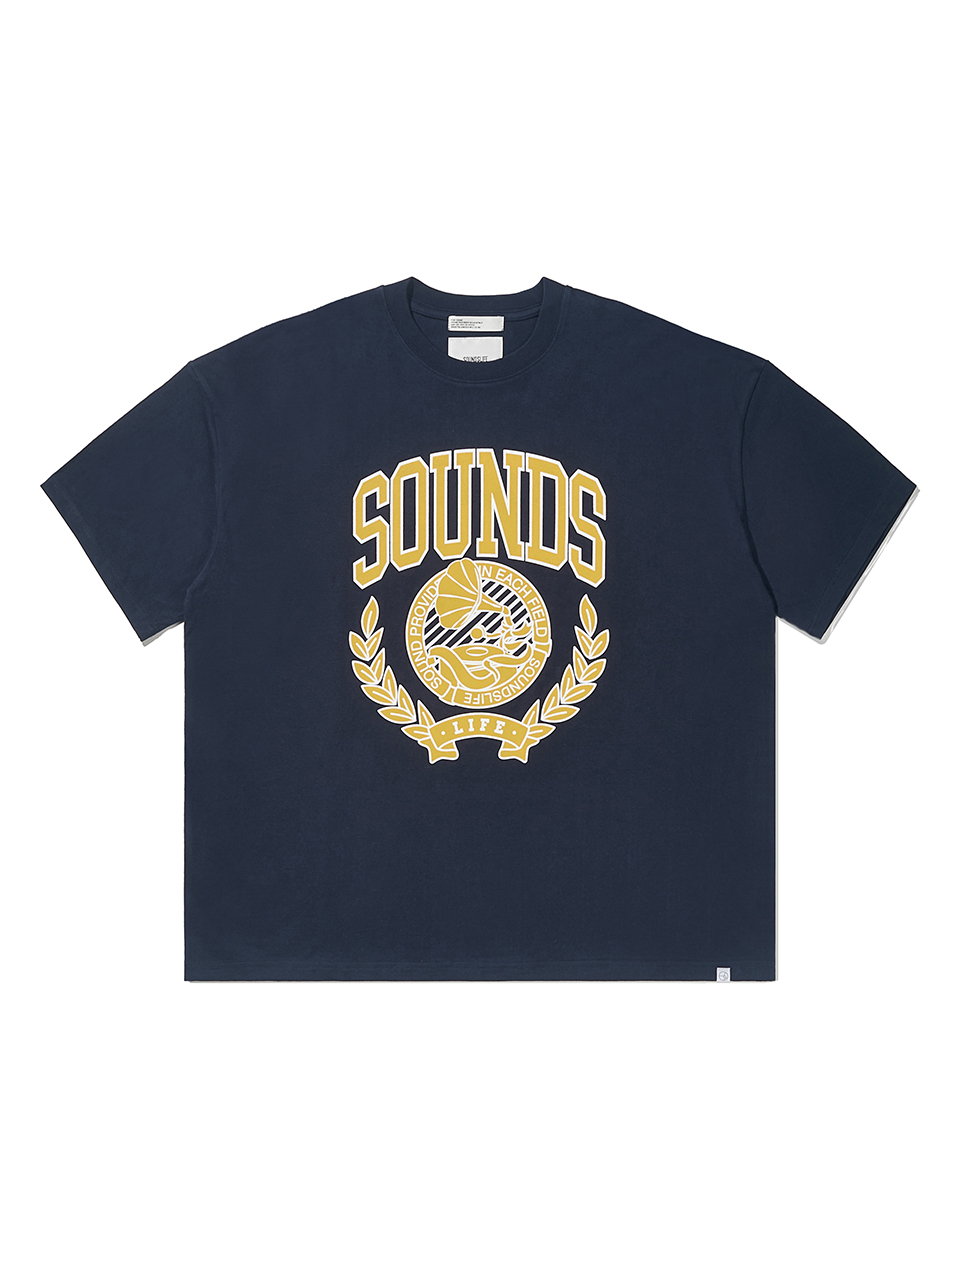 SOUNDSLIFE - Sounds Graphic T-Shirt Navy